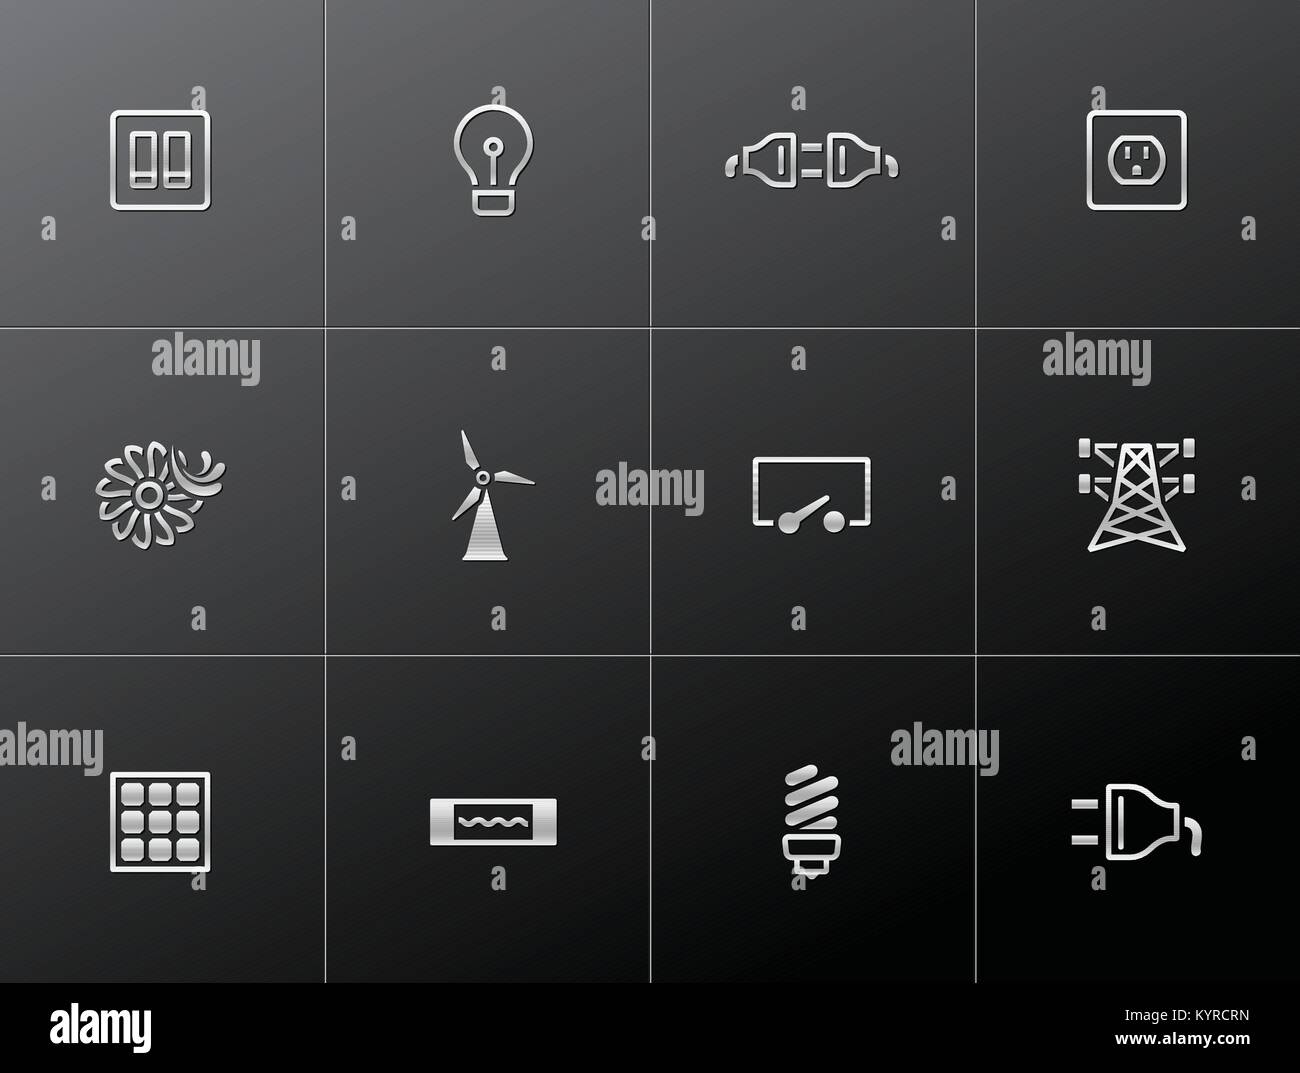 Electricity icons in metallic styles. Stock Vector